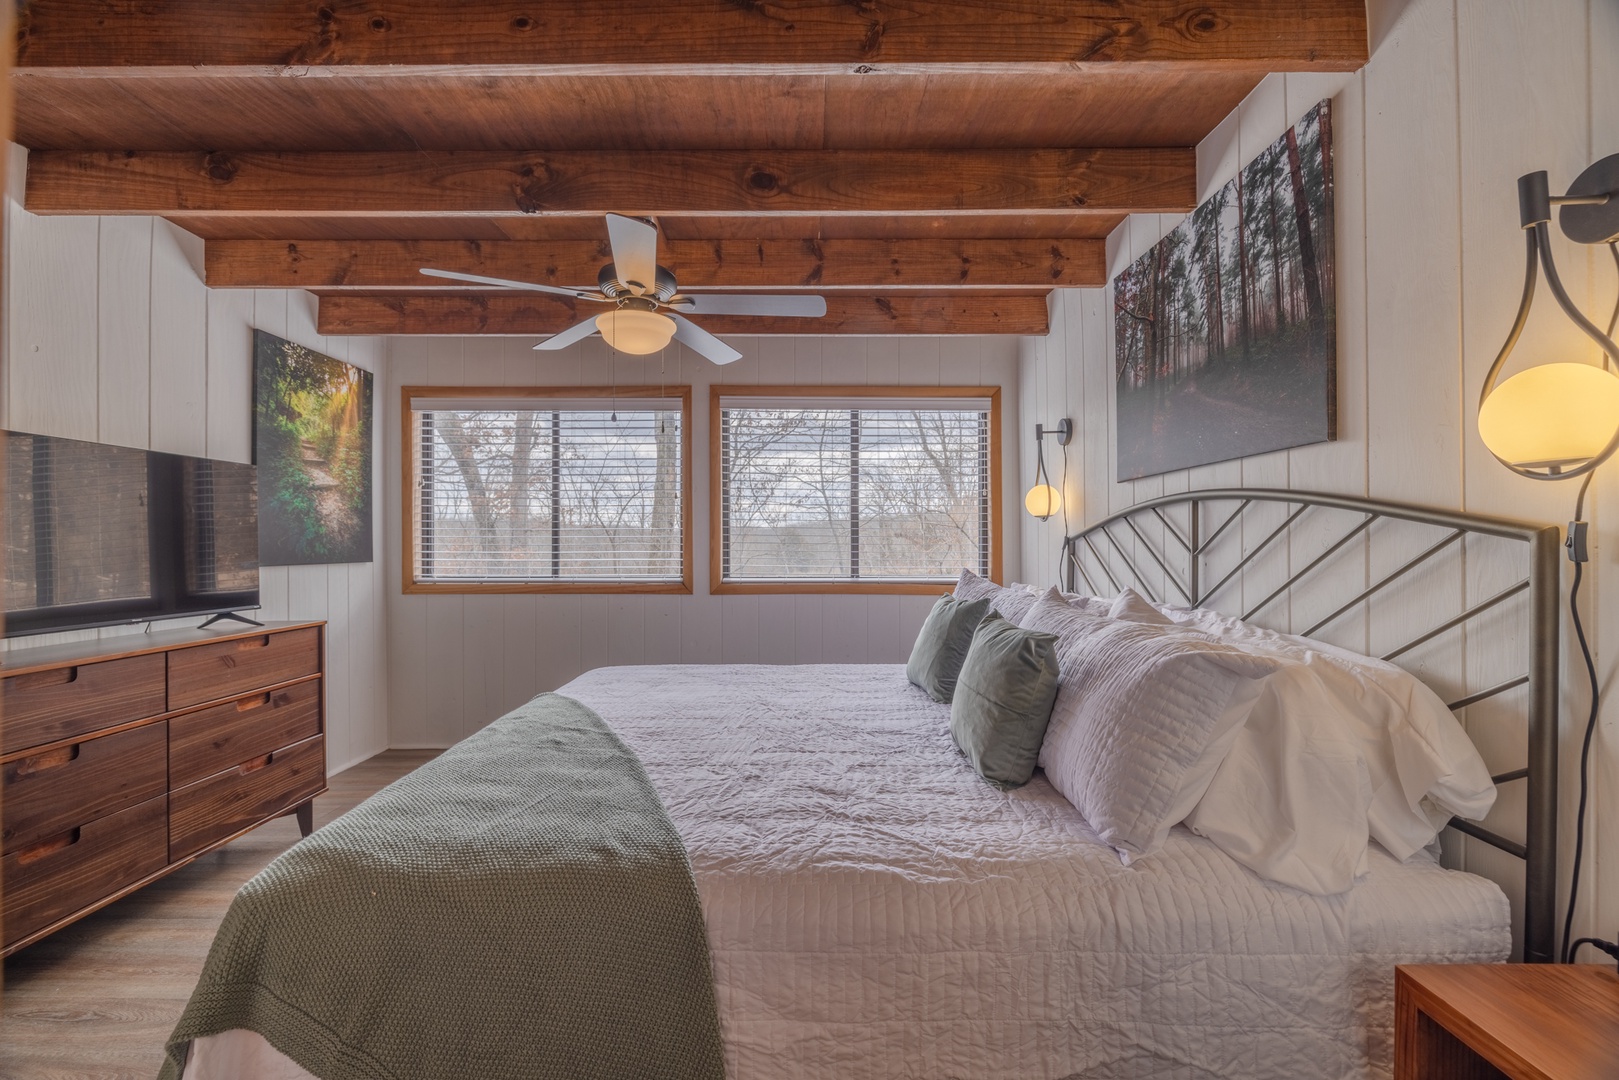 Bedroom 1 -The king sized bed and premium bedding will give you restful sleep with the charming wooded views. “Would stay again” - Felix the Cat